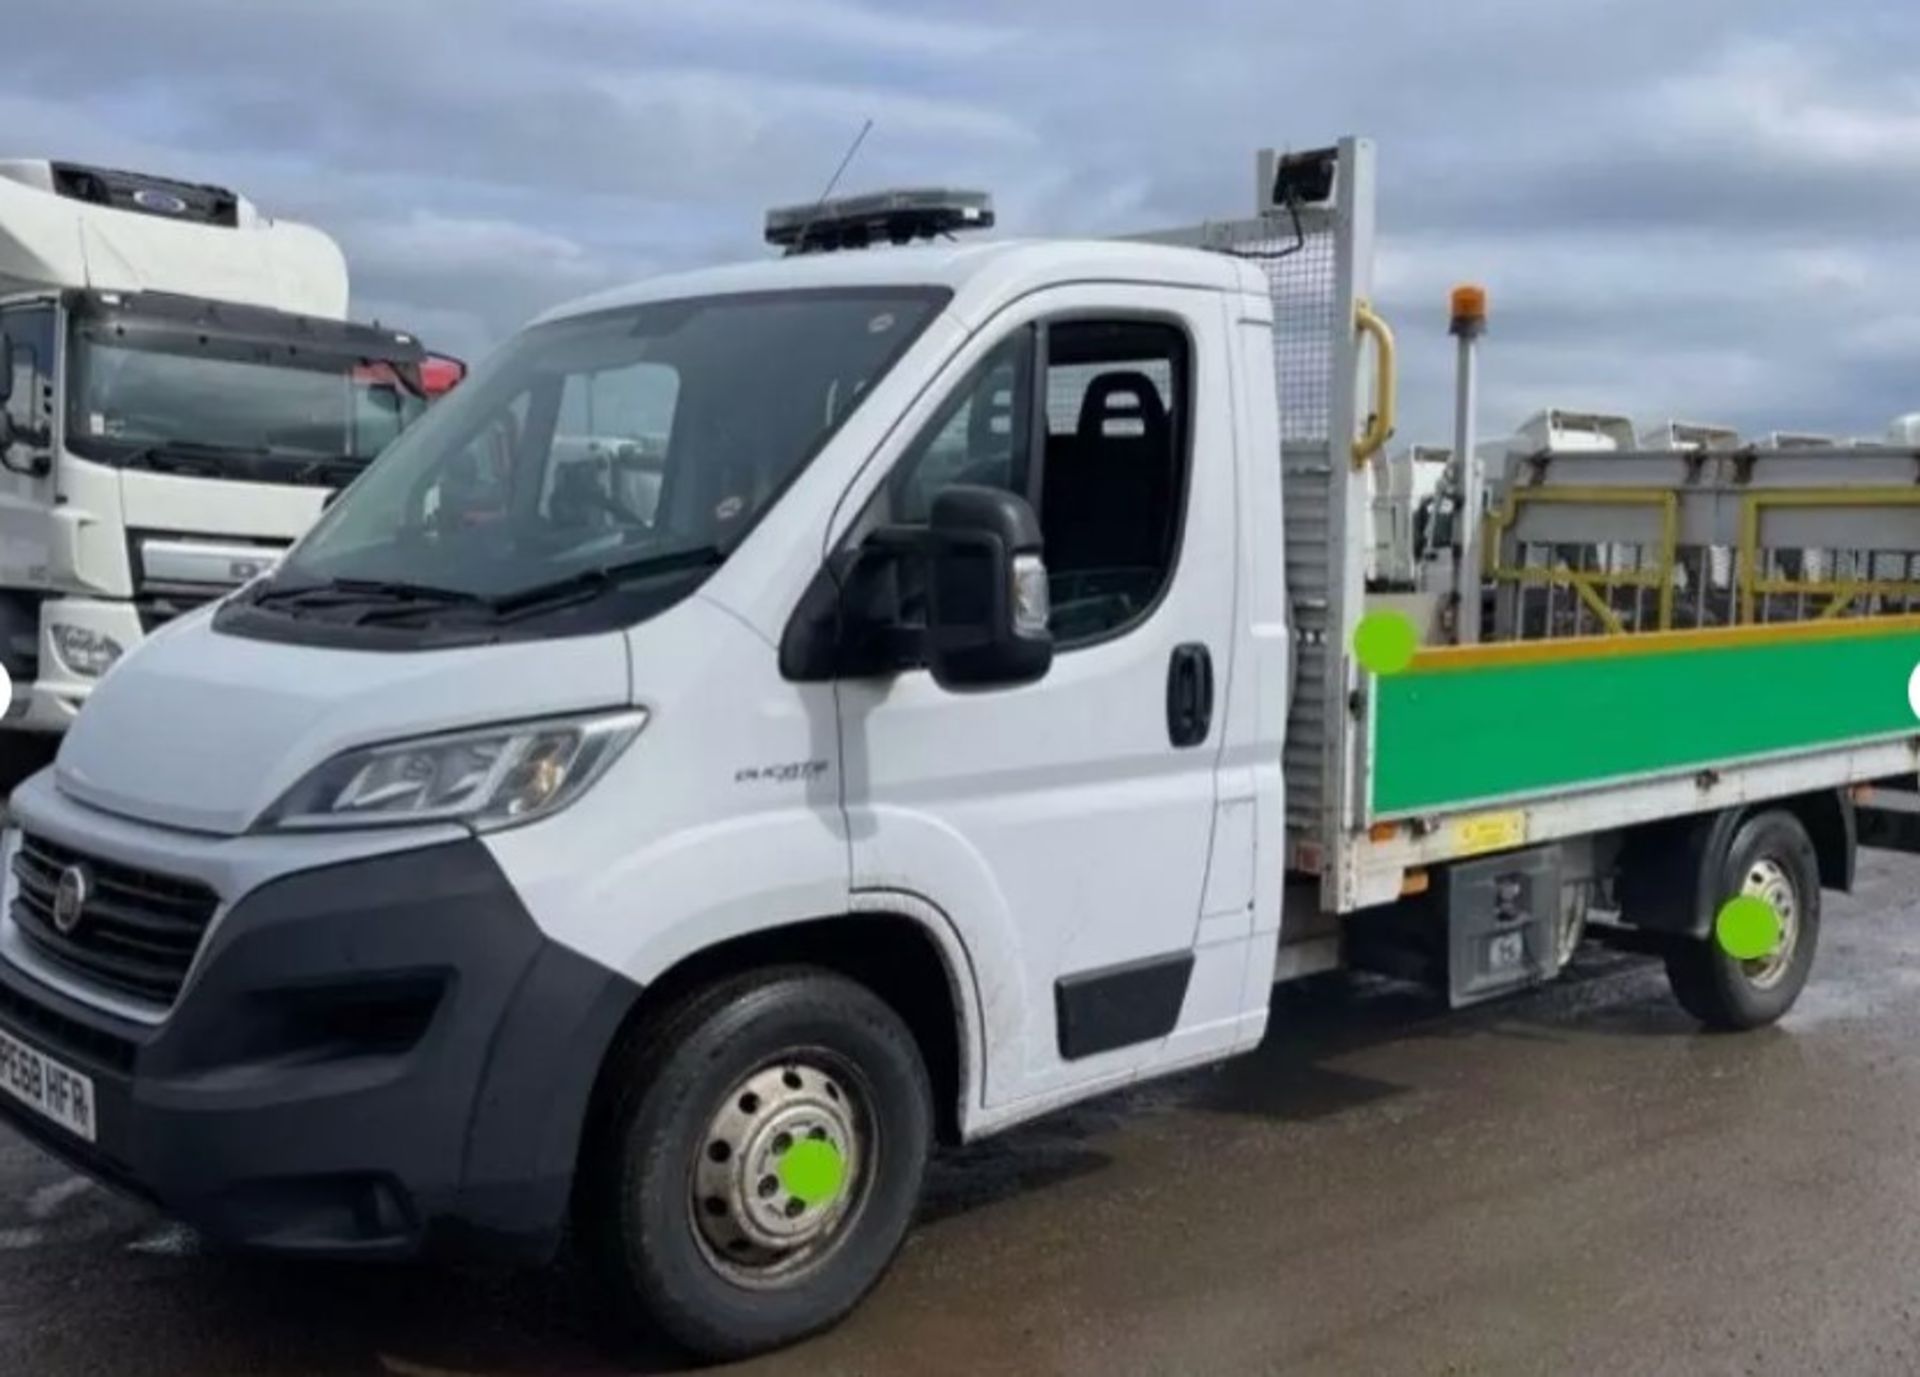 2018-68REG FIAT DUCATO 35 MULTIJET LWB DROP SIDE - YOUR RELIABLE WORKHORSE READY FOR ANY TASK - Image 2 of 10